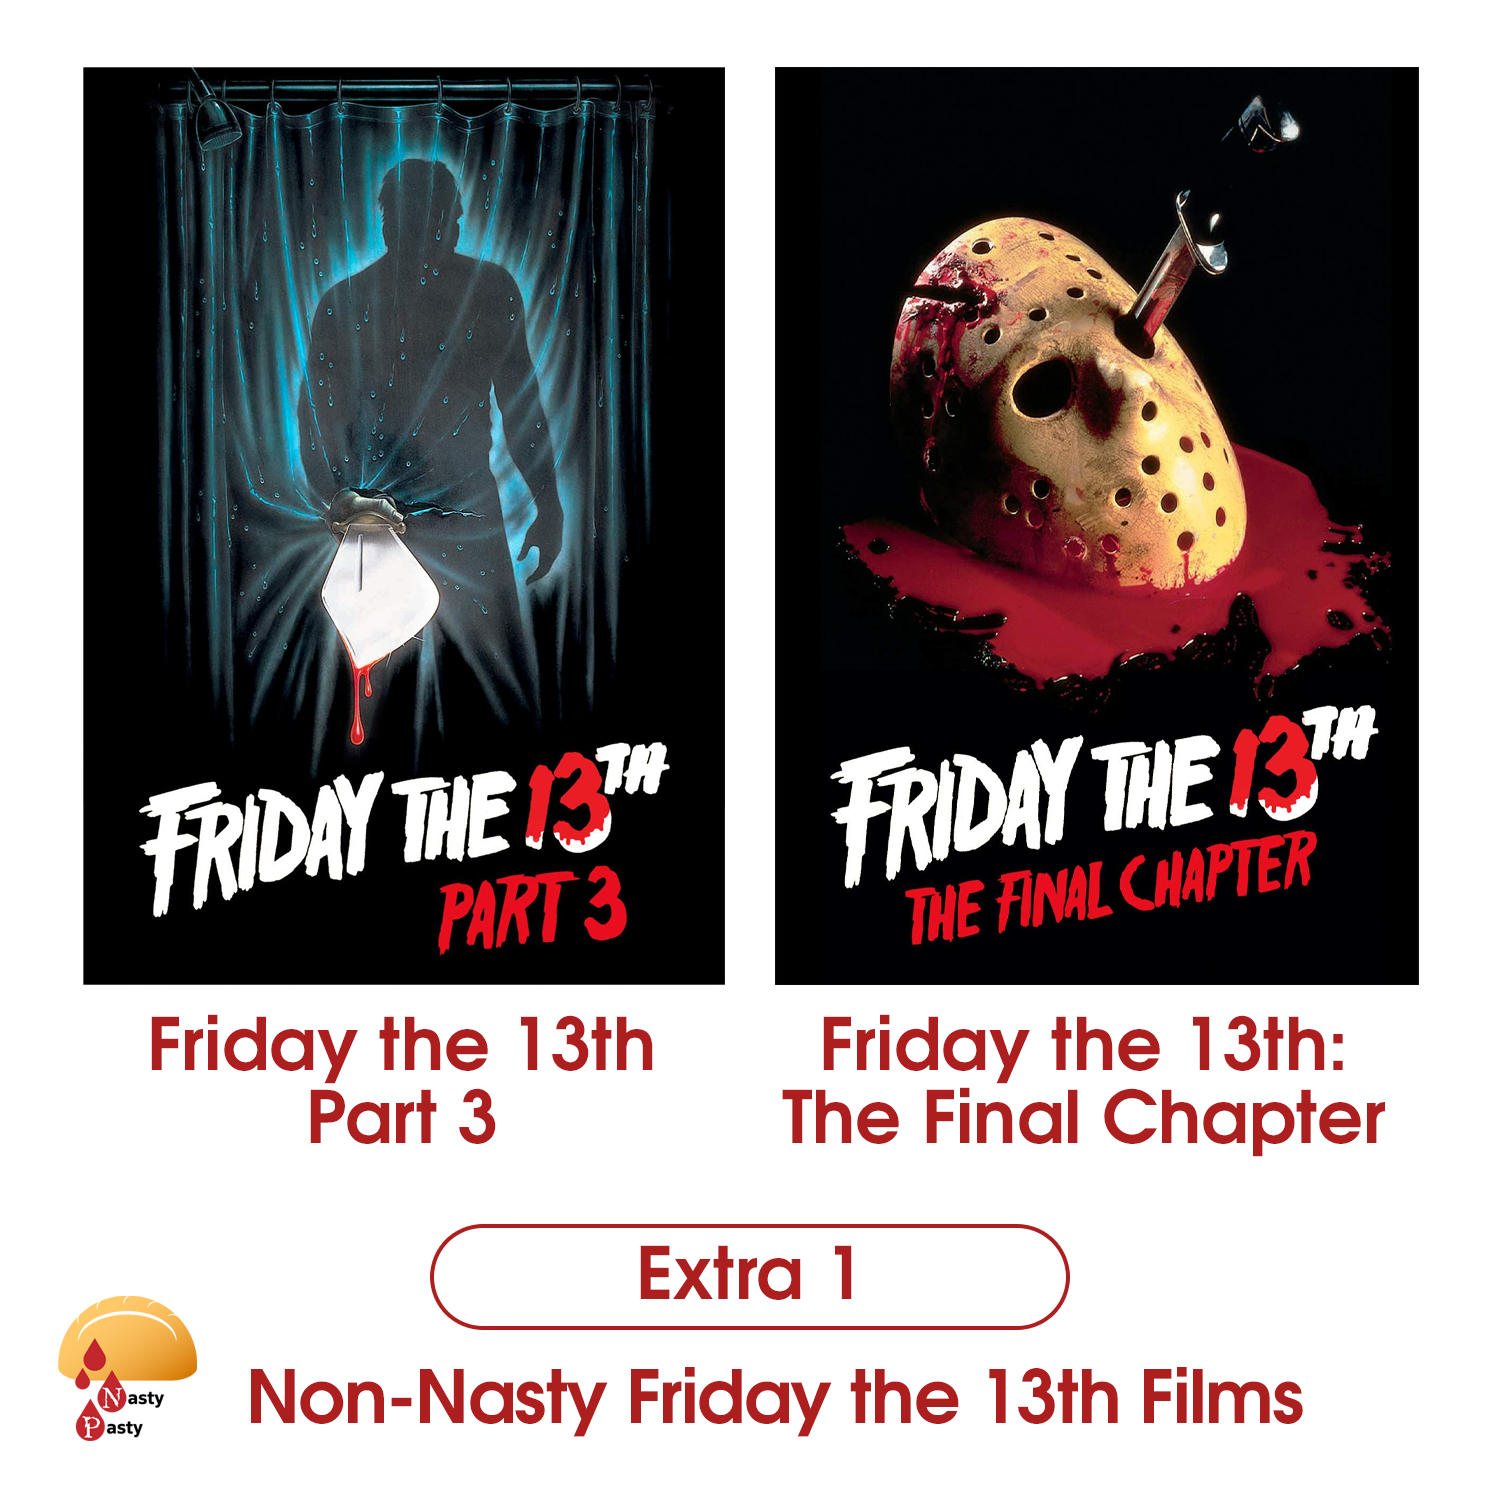 Extra 1: Non-Nasty Friday the 13th Films